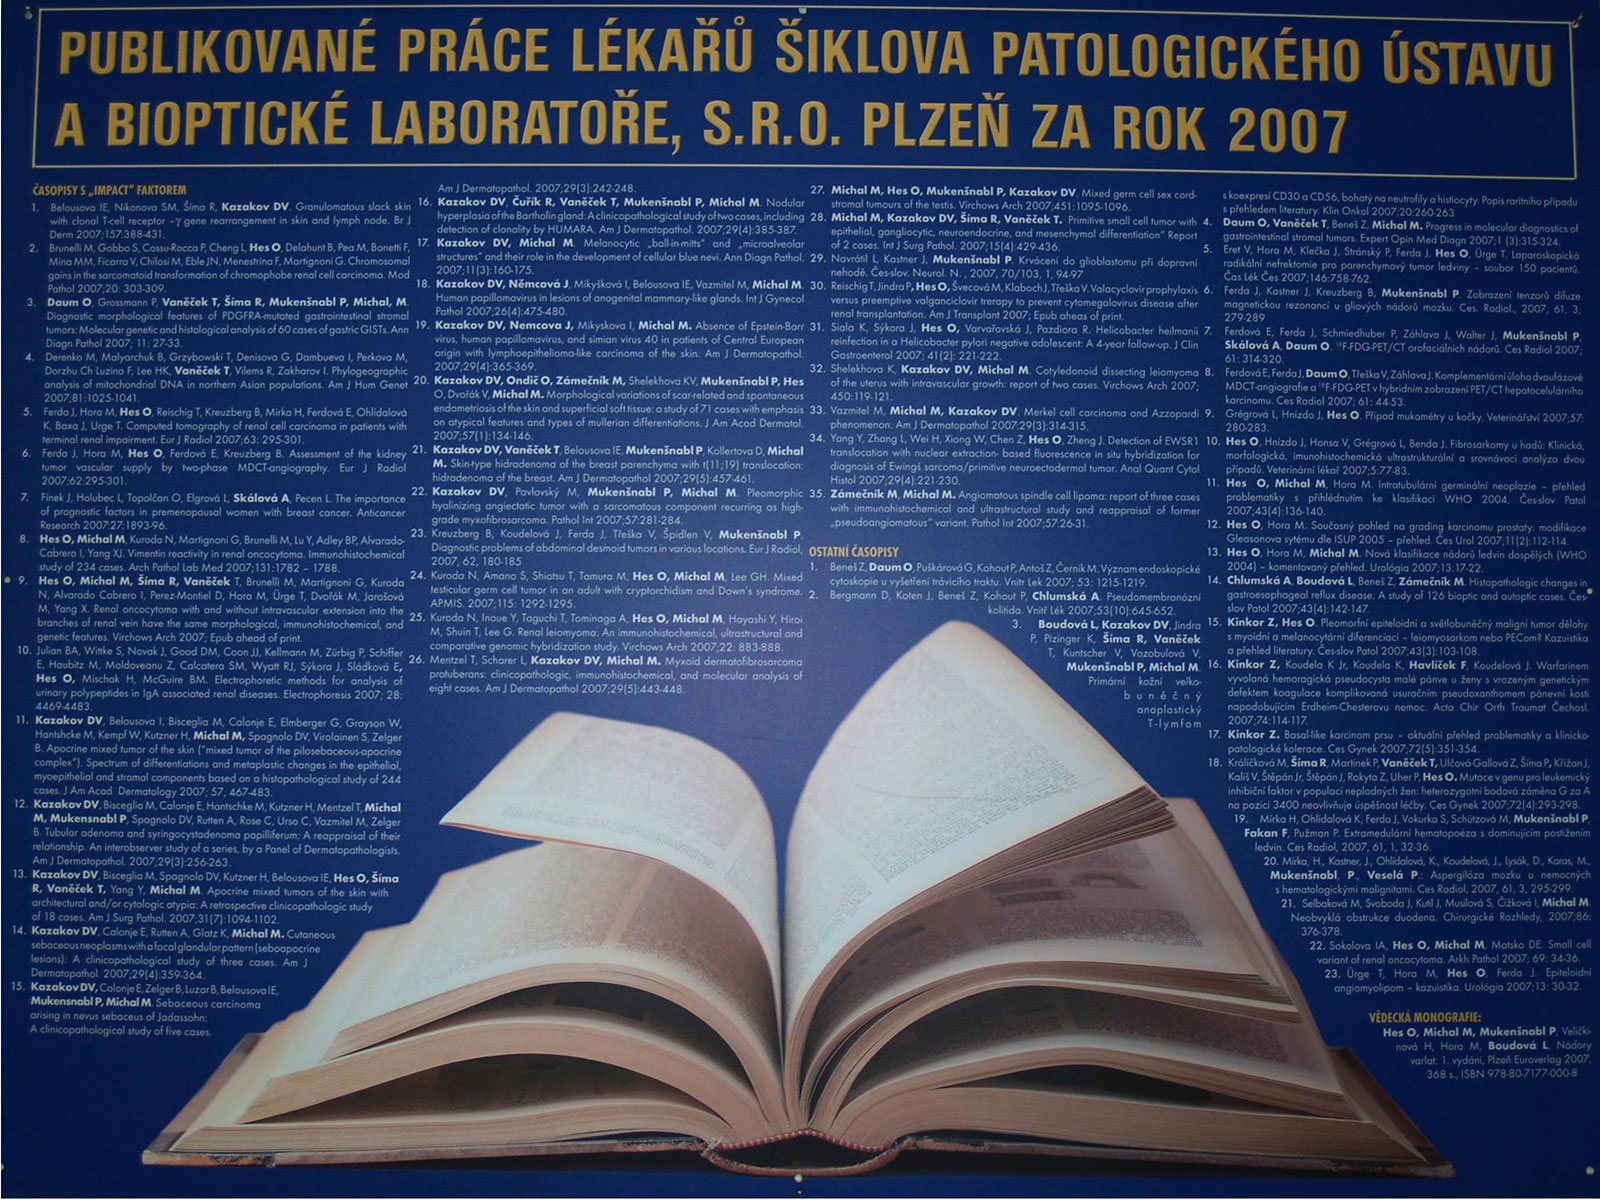 Poster: List of publications